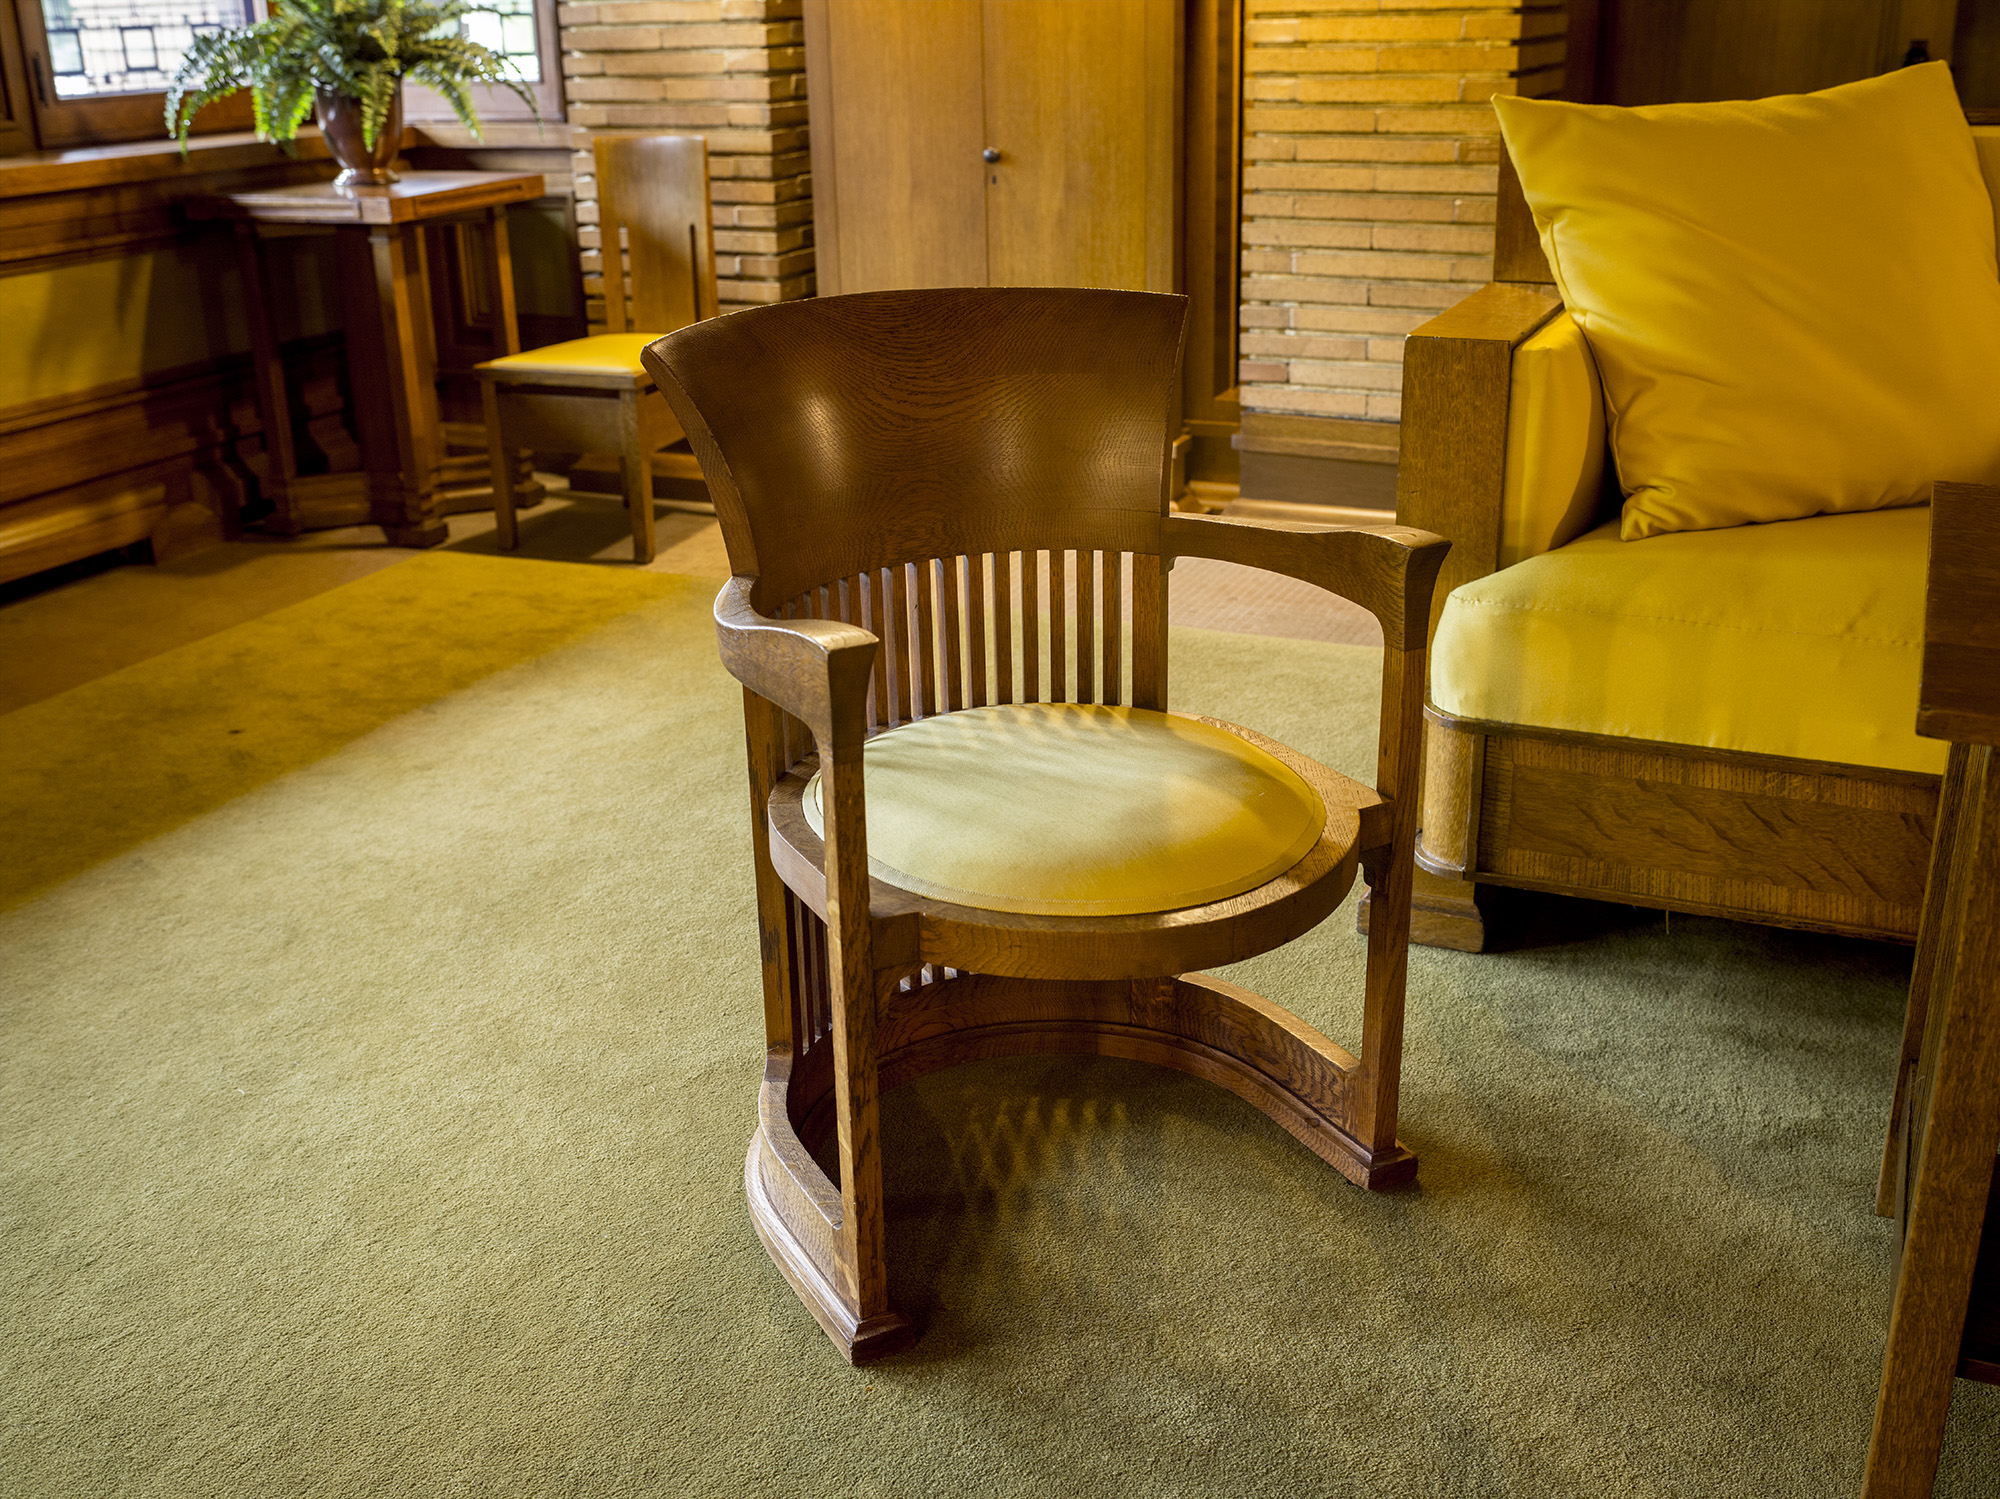 The Making of Frank Lloyd Wright’s Barrel Chair